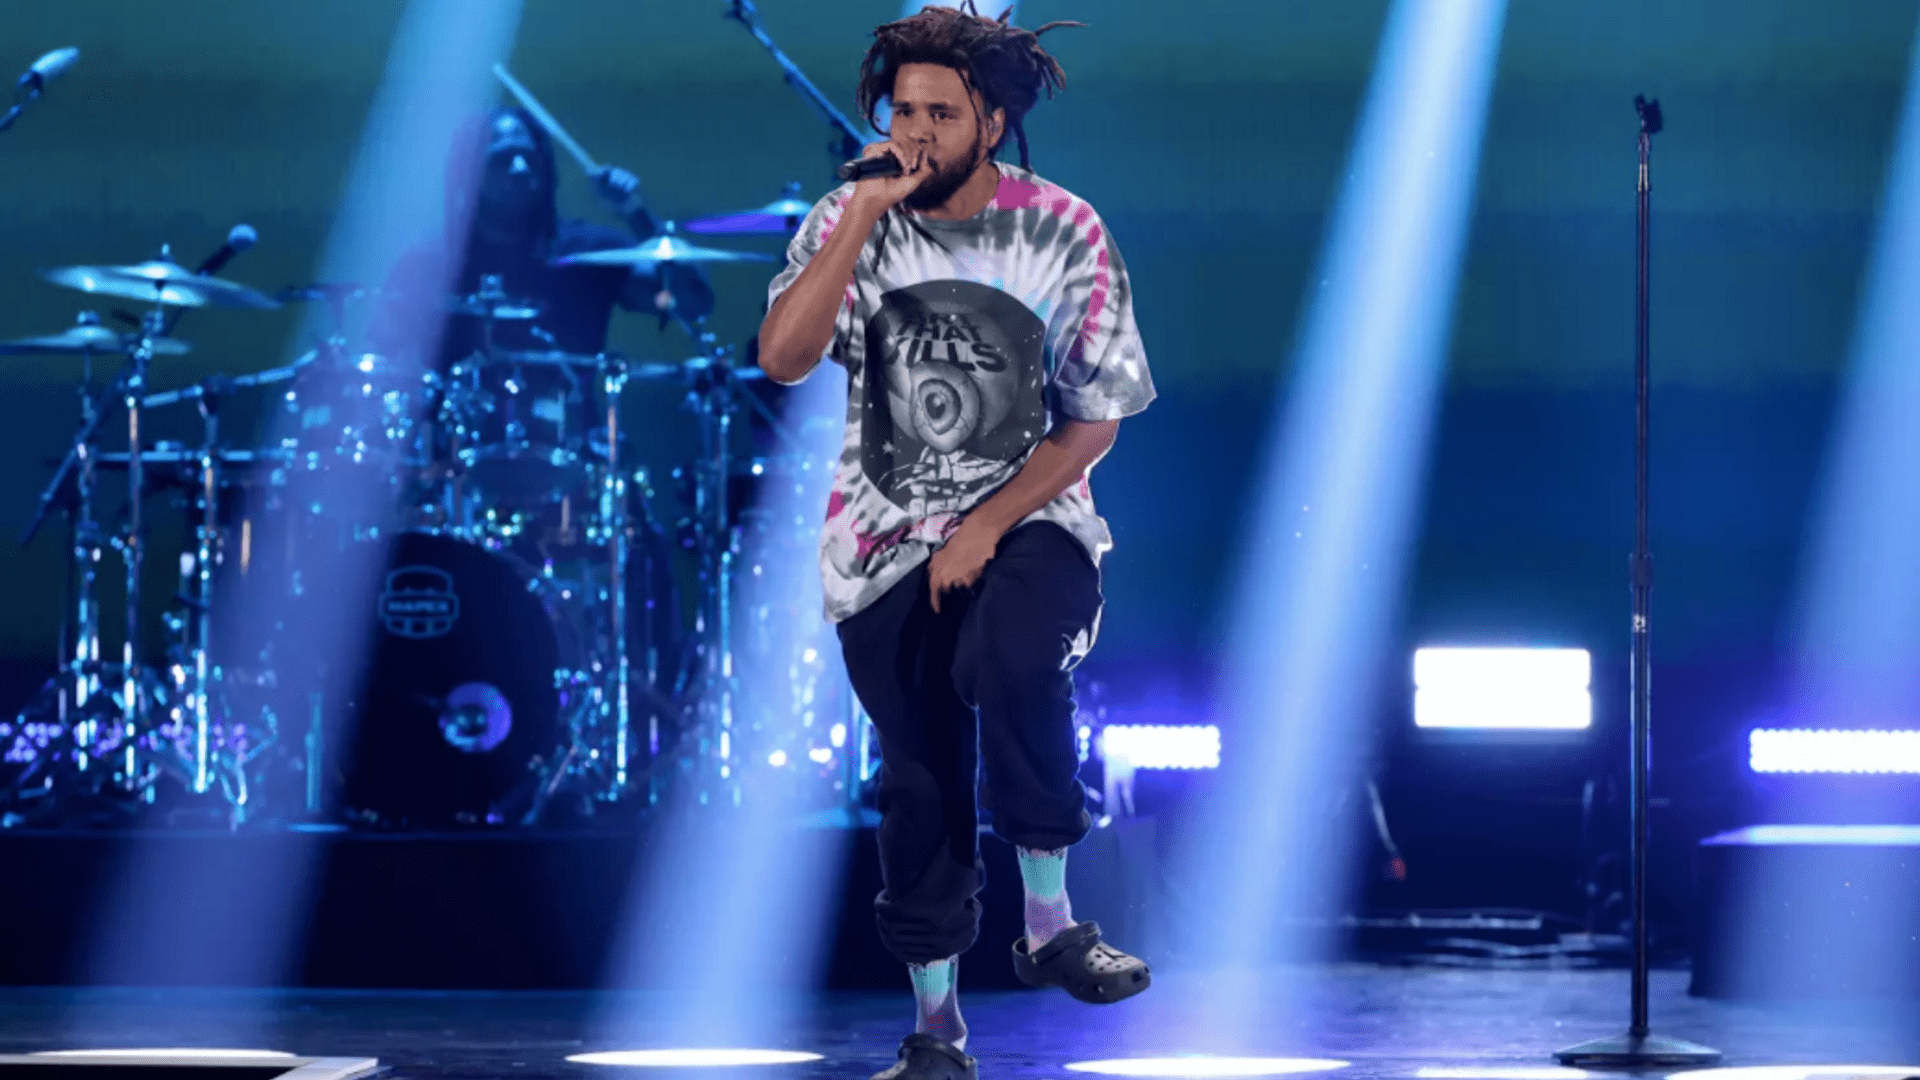 j. cole in crocs at the iheart radio show